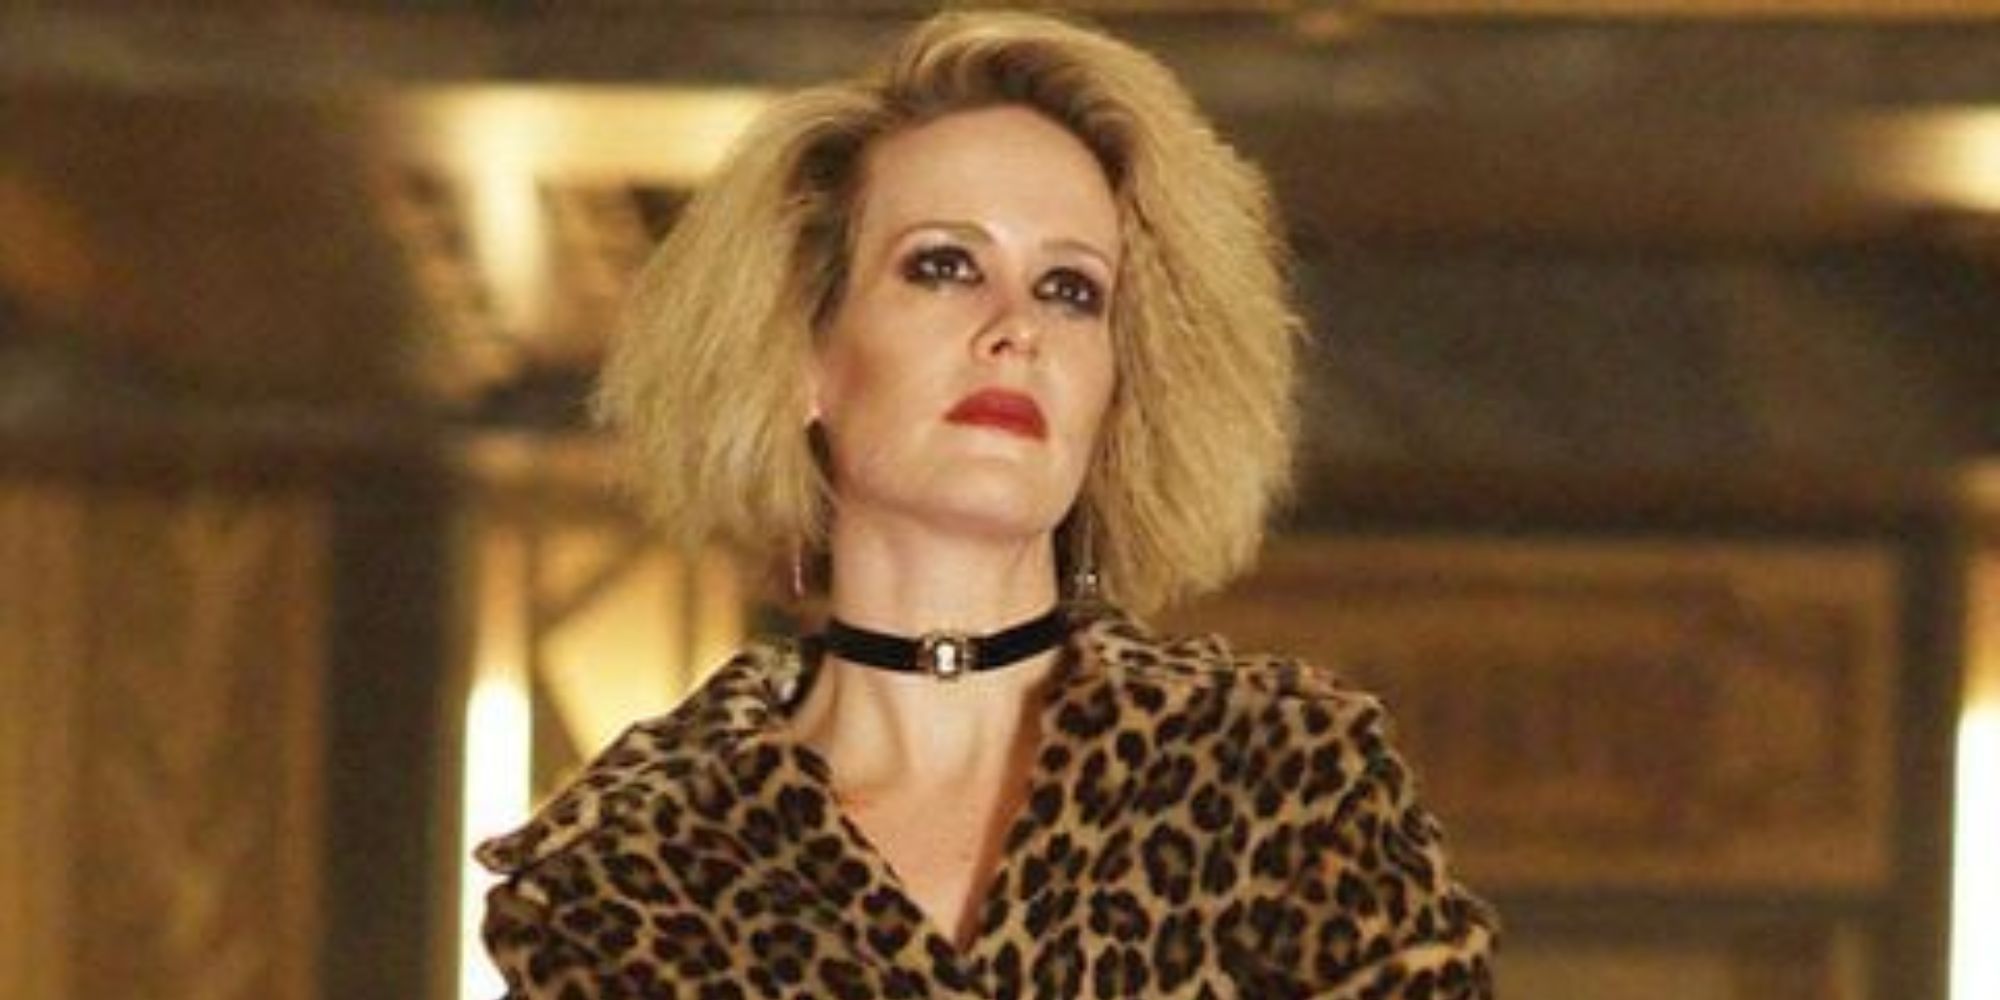 Sally, played by Sarah Paulson, wearing a leopard print jacket in 'AHS: Hotel'